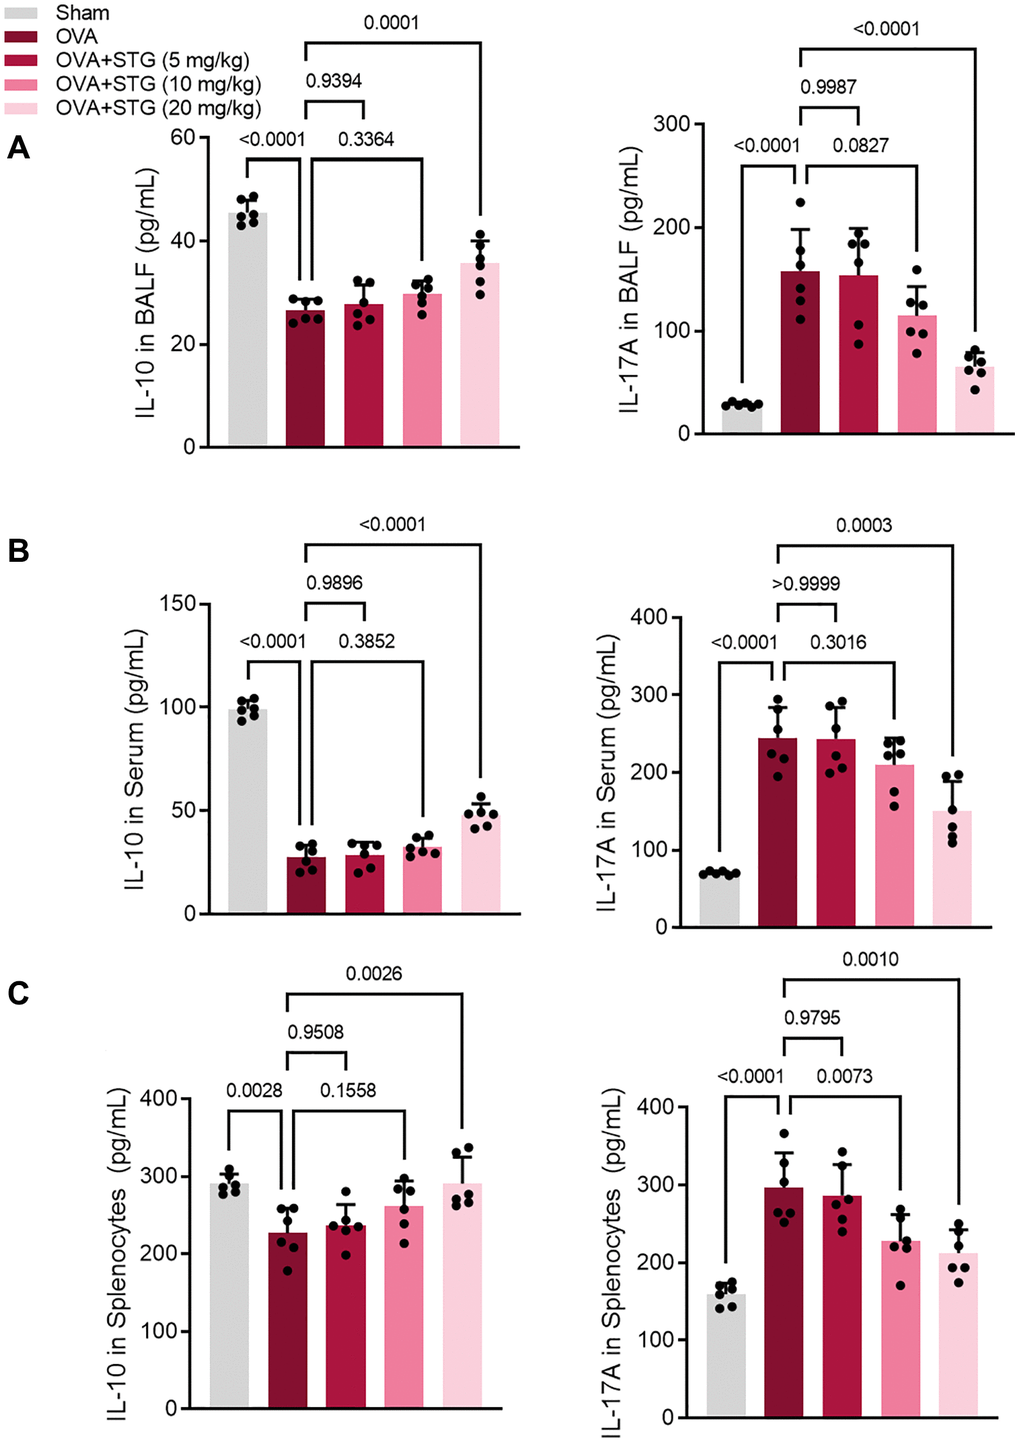 Effect of maltol on IL-17A and IL-10 expression in BALF, serum and splenocytes of OVA-challenged mice. (A) Expression levels of IL-17A and IL-10 in BALF. (B) Expression levels of IL-17A and IL-10 in serum. (C) Expression levels of IL-17A and IL-10 in splenocytes. p 